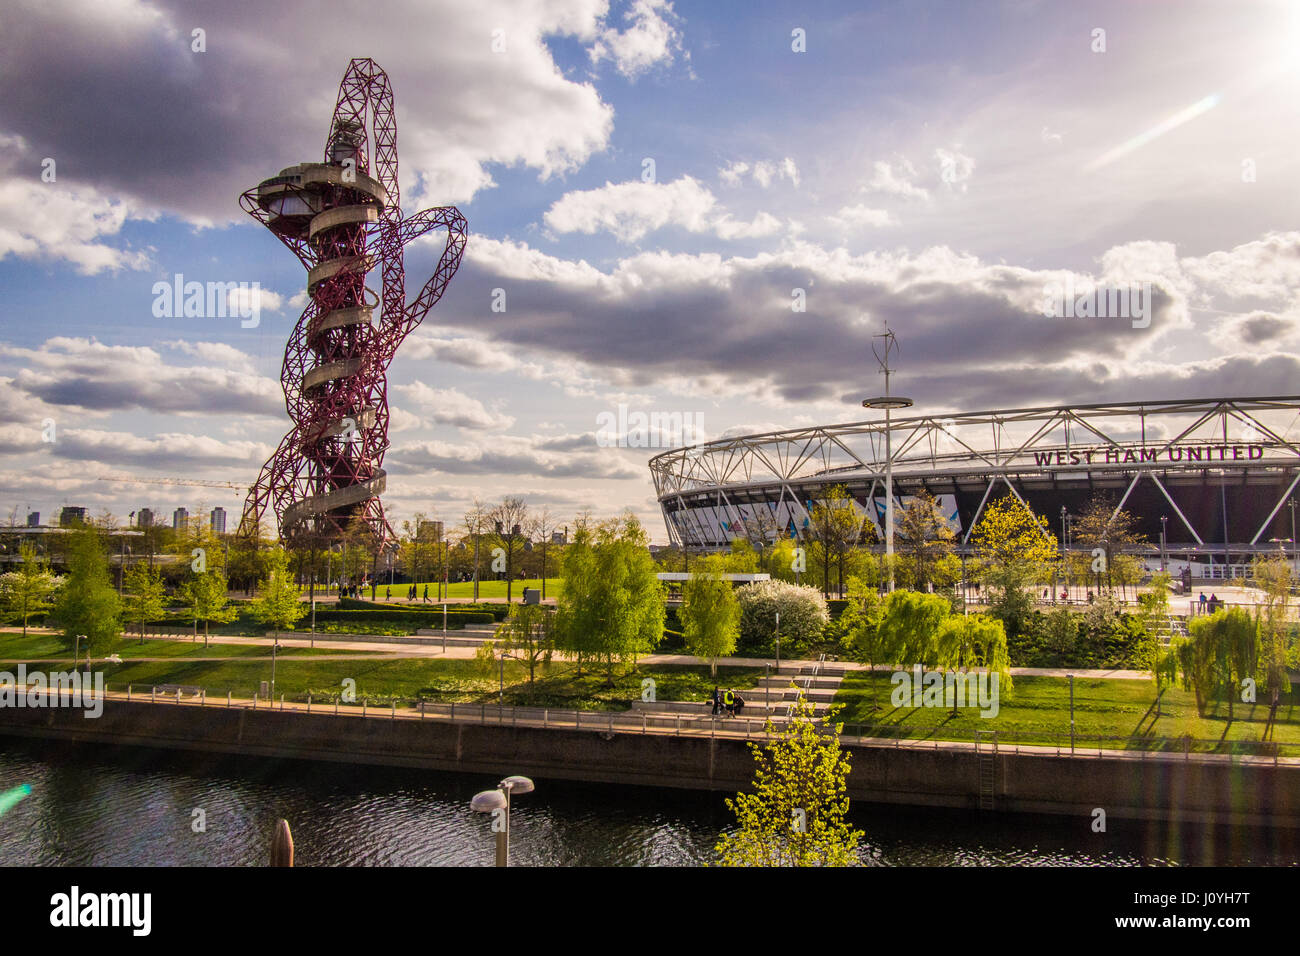 ArcelorMittal Orbit steel structure with tube slide next to the Olympic Stadium (Now West Ham's football ground), Olympic Park,  London Stock Photo